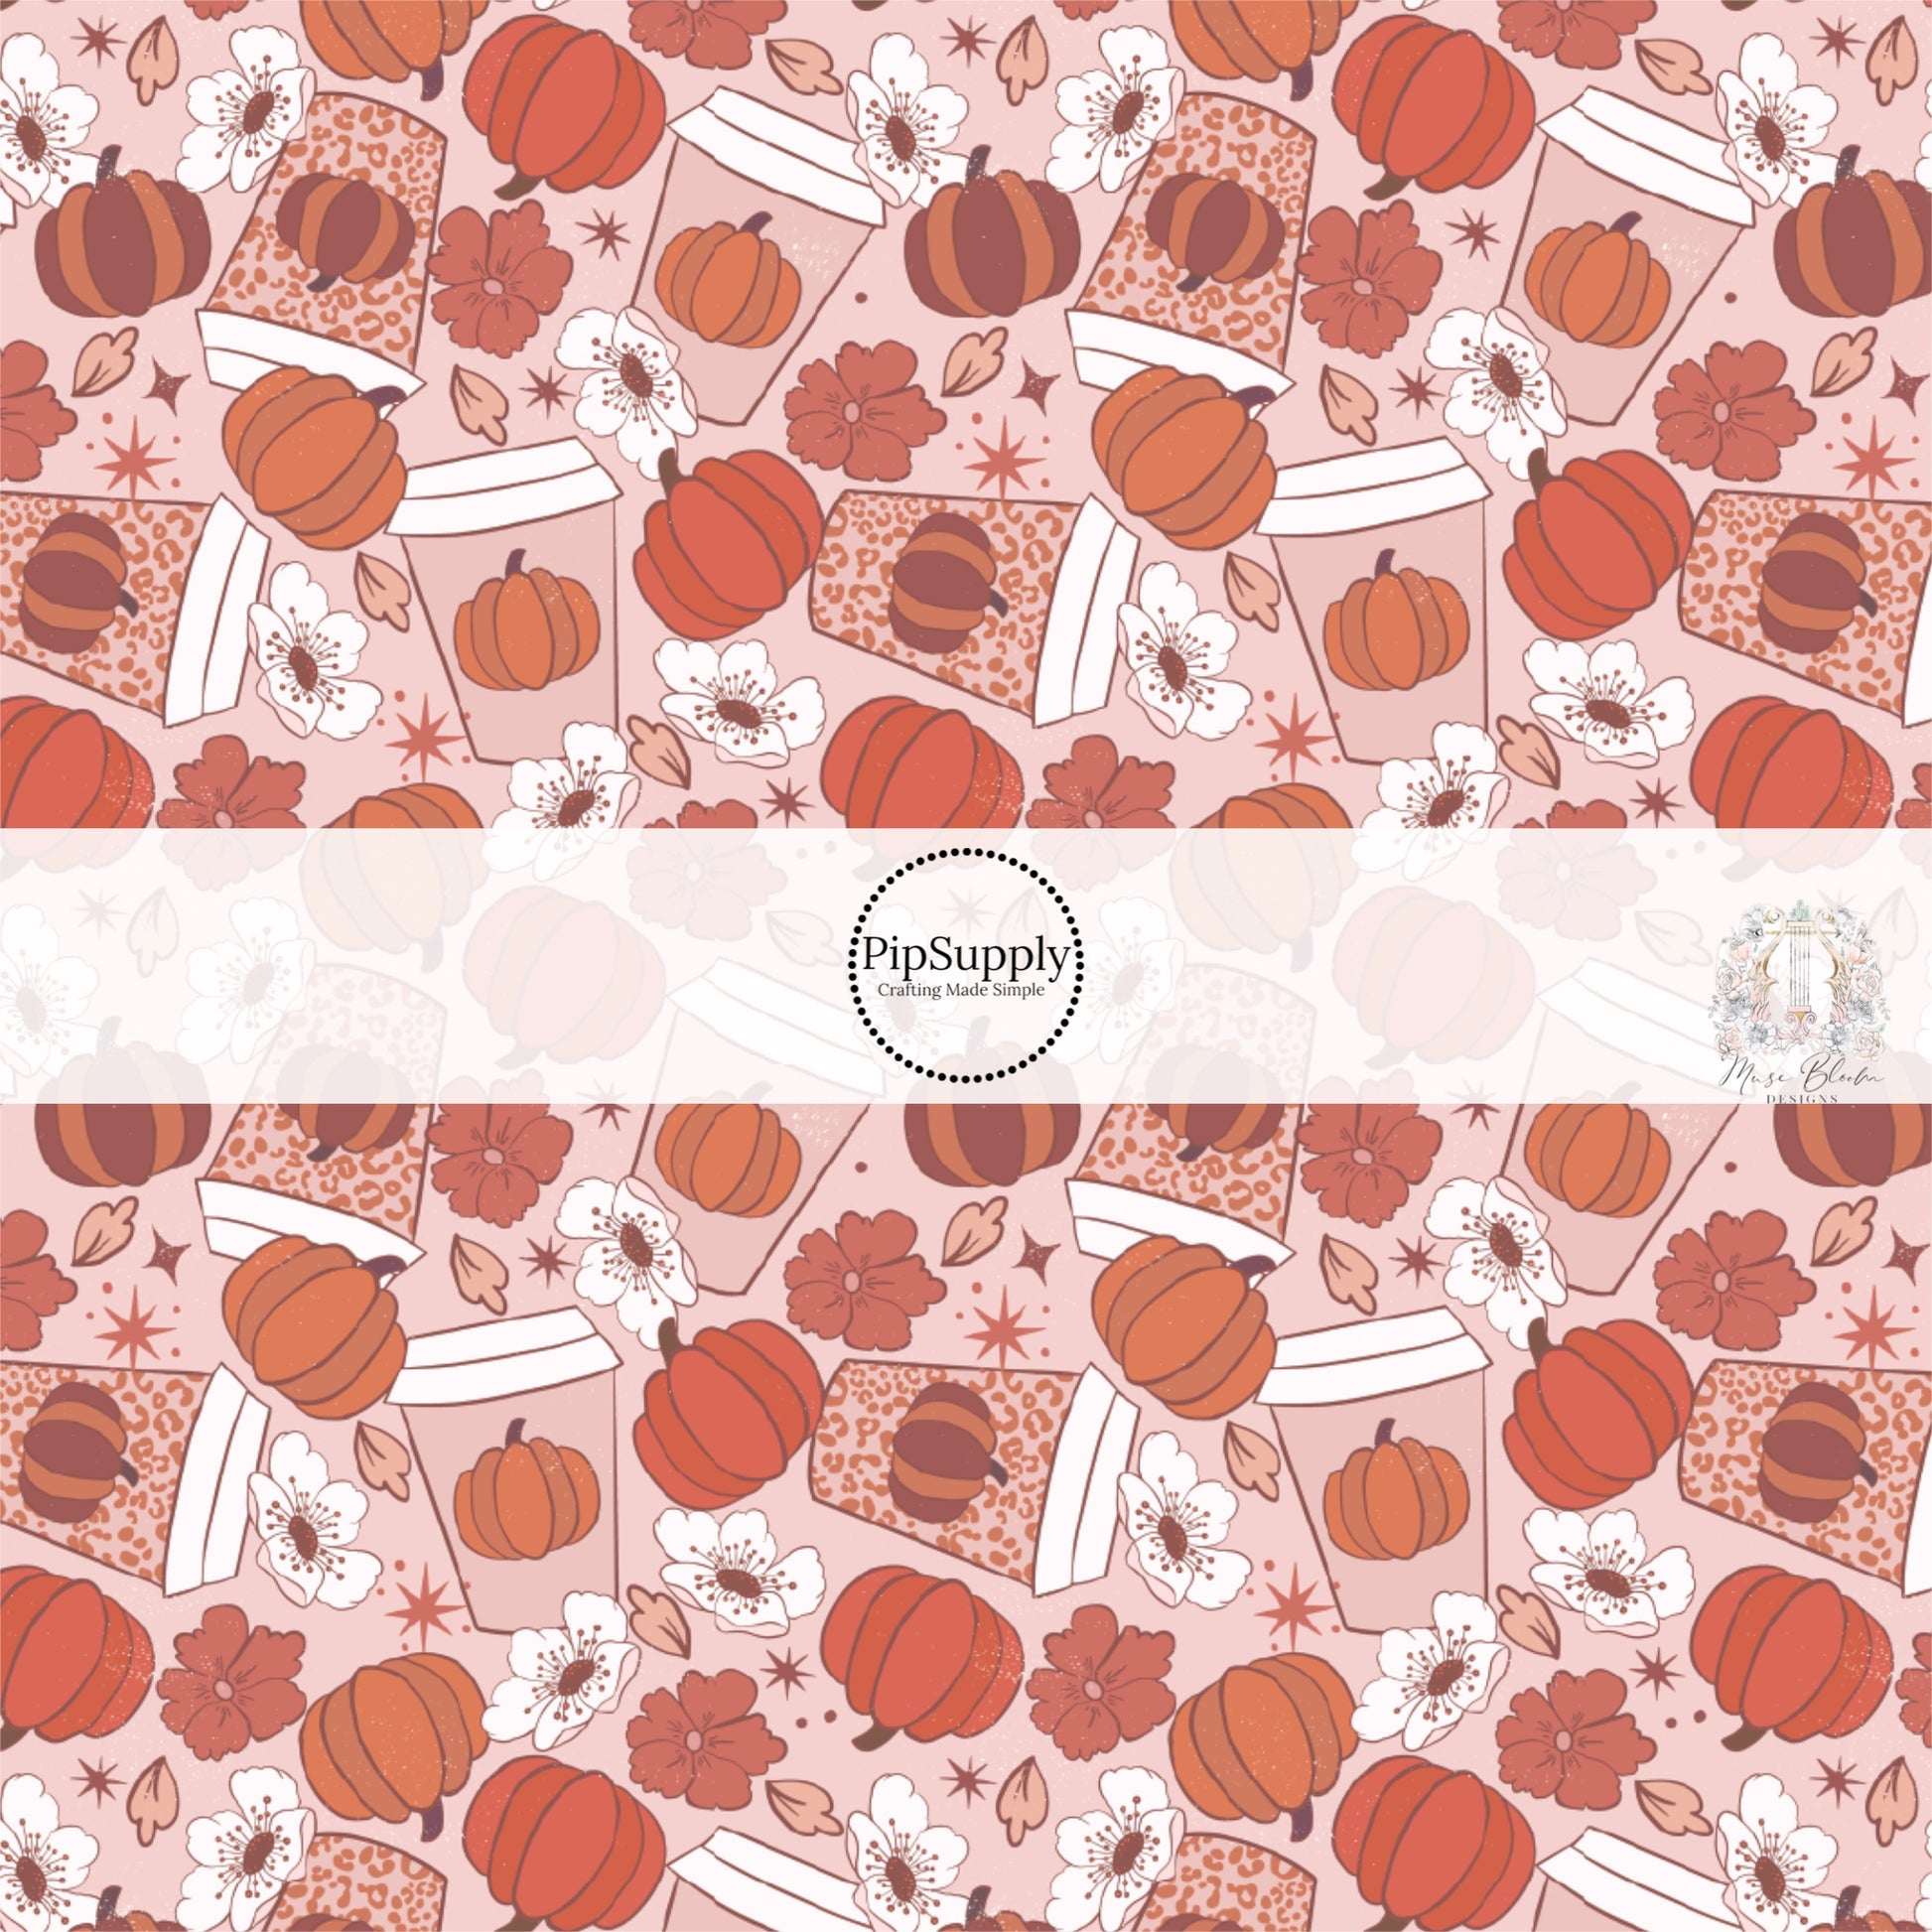 These fall pumpkin themed pink and orange fabric by the yard features pumpkin spice cups surrounded by white and pink flowers and orange pumpkins.. This fun fall themed fabric can be used for all your sewing and crafting needs! 